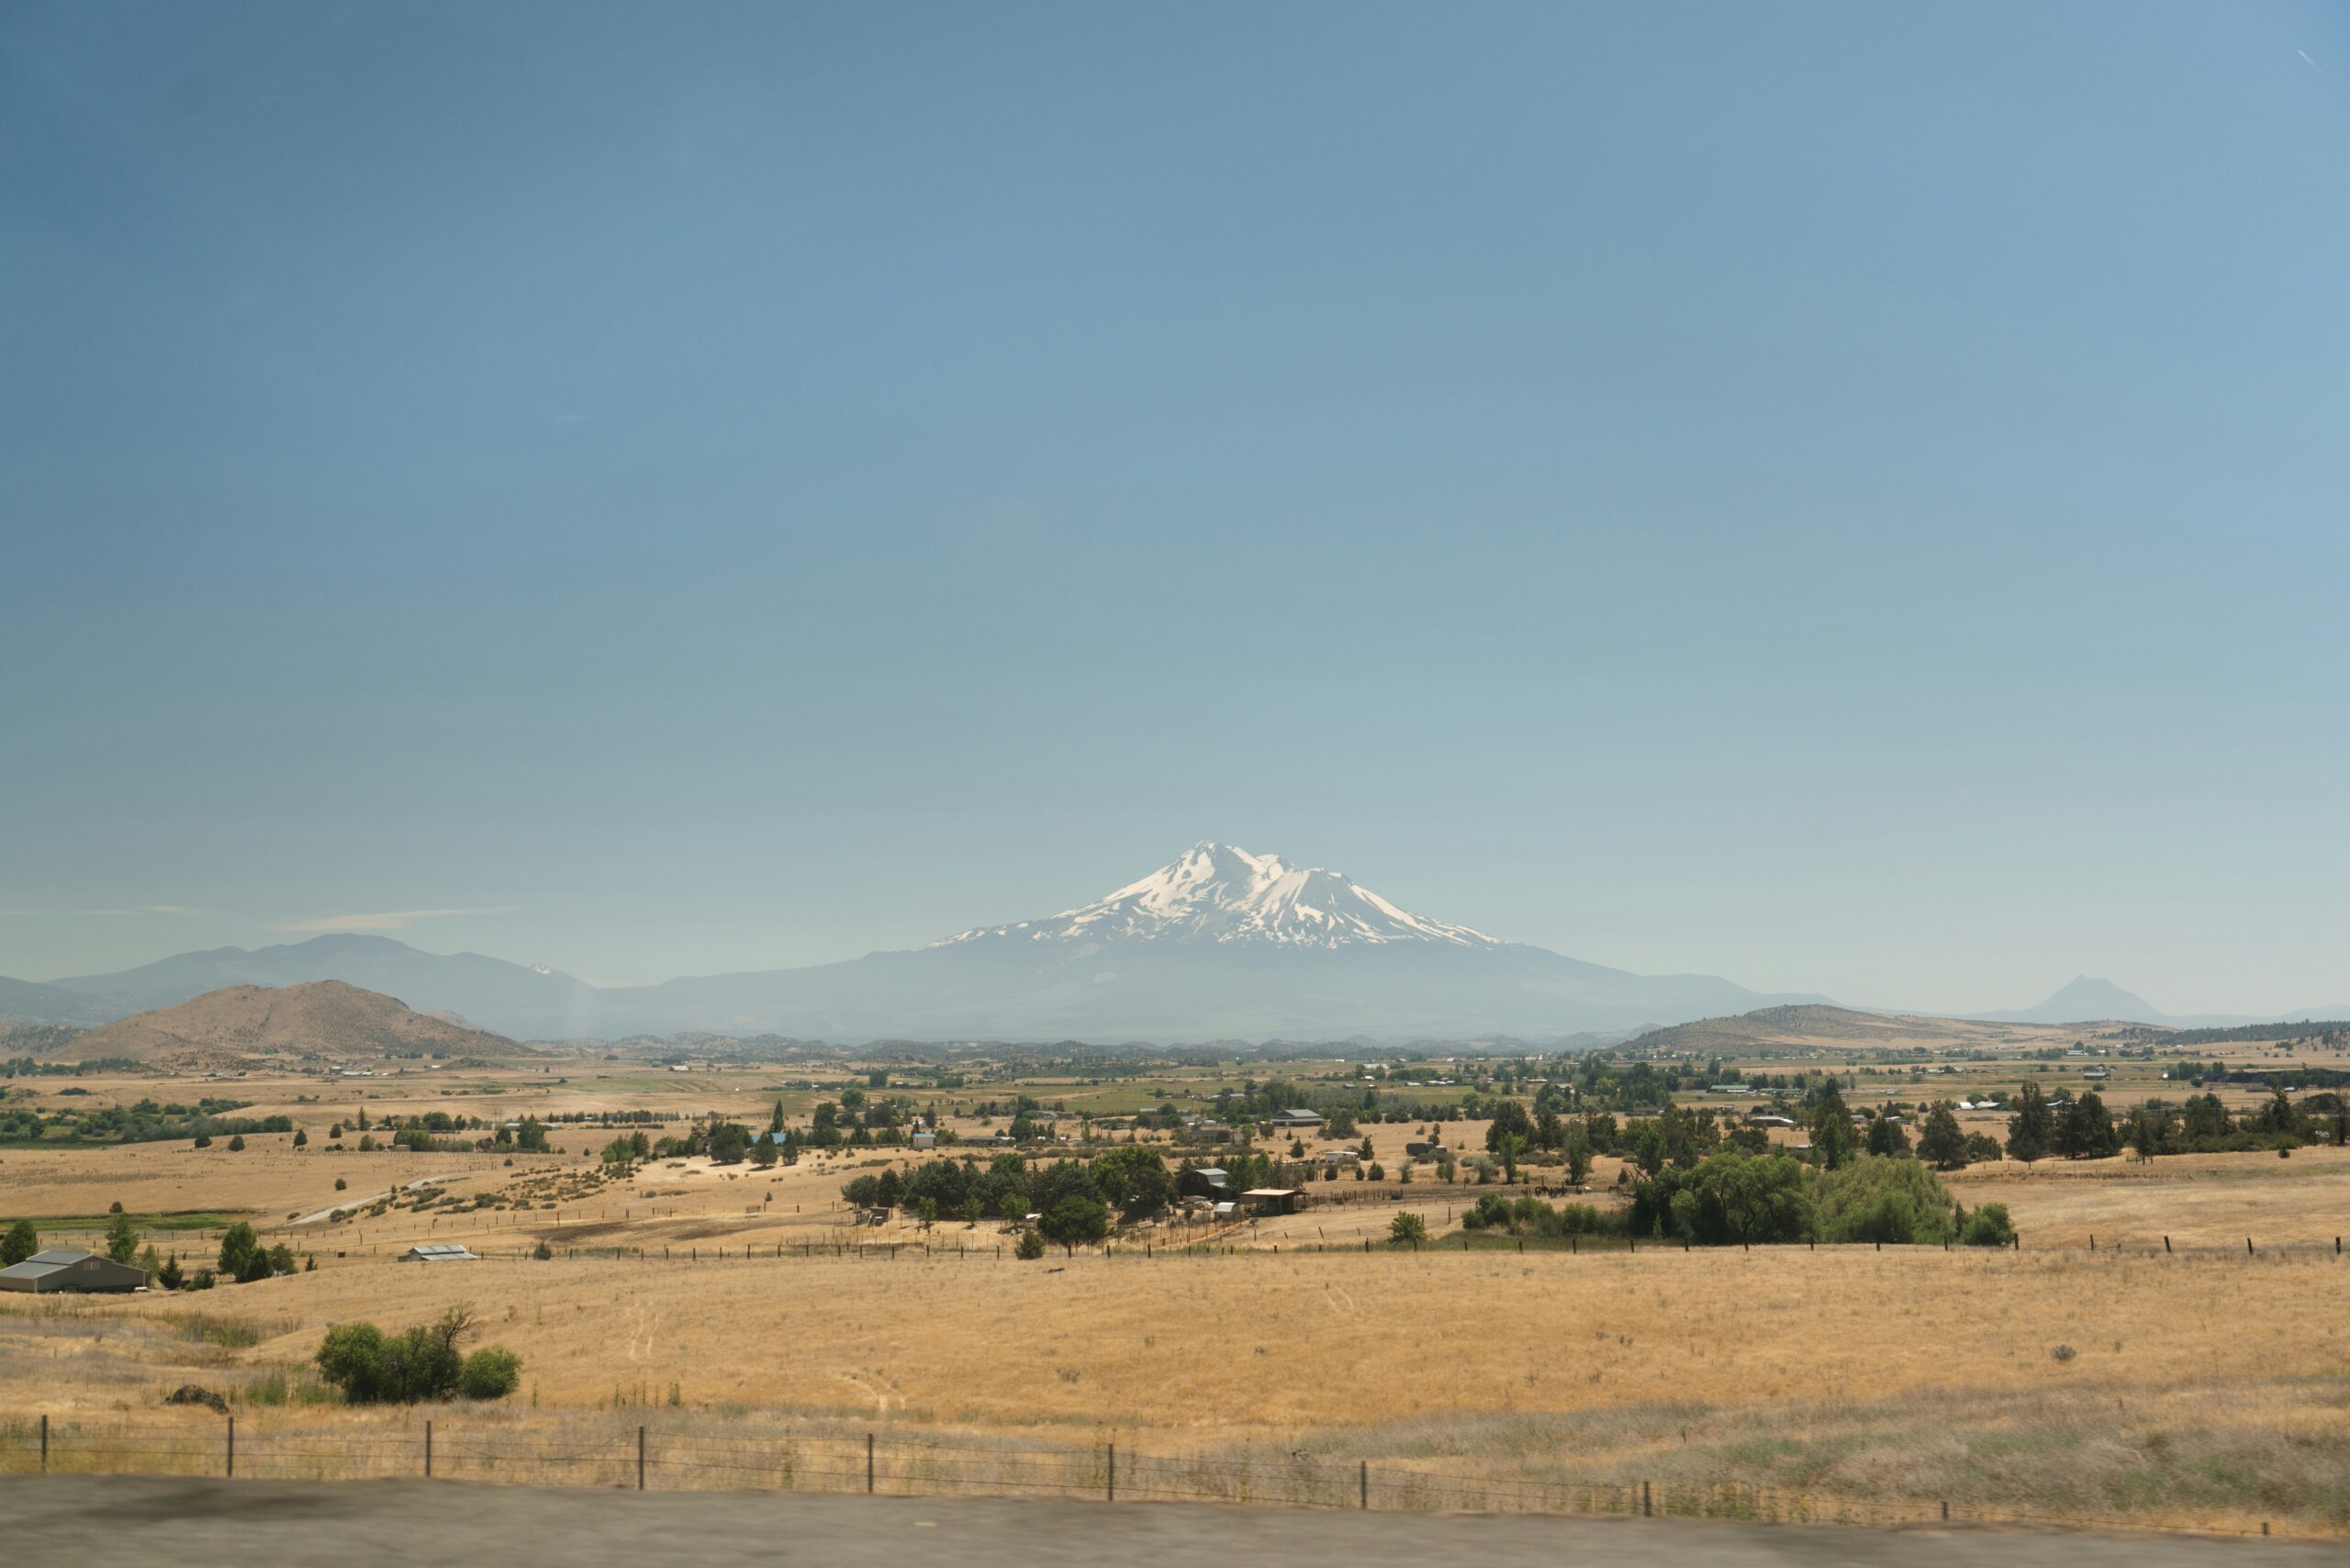 What Should I Do In Case Of An Emergency On Mount Shasta?